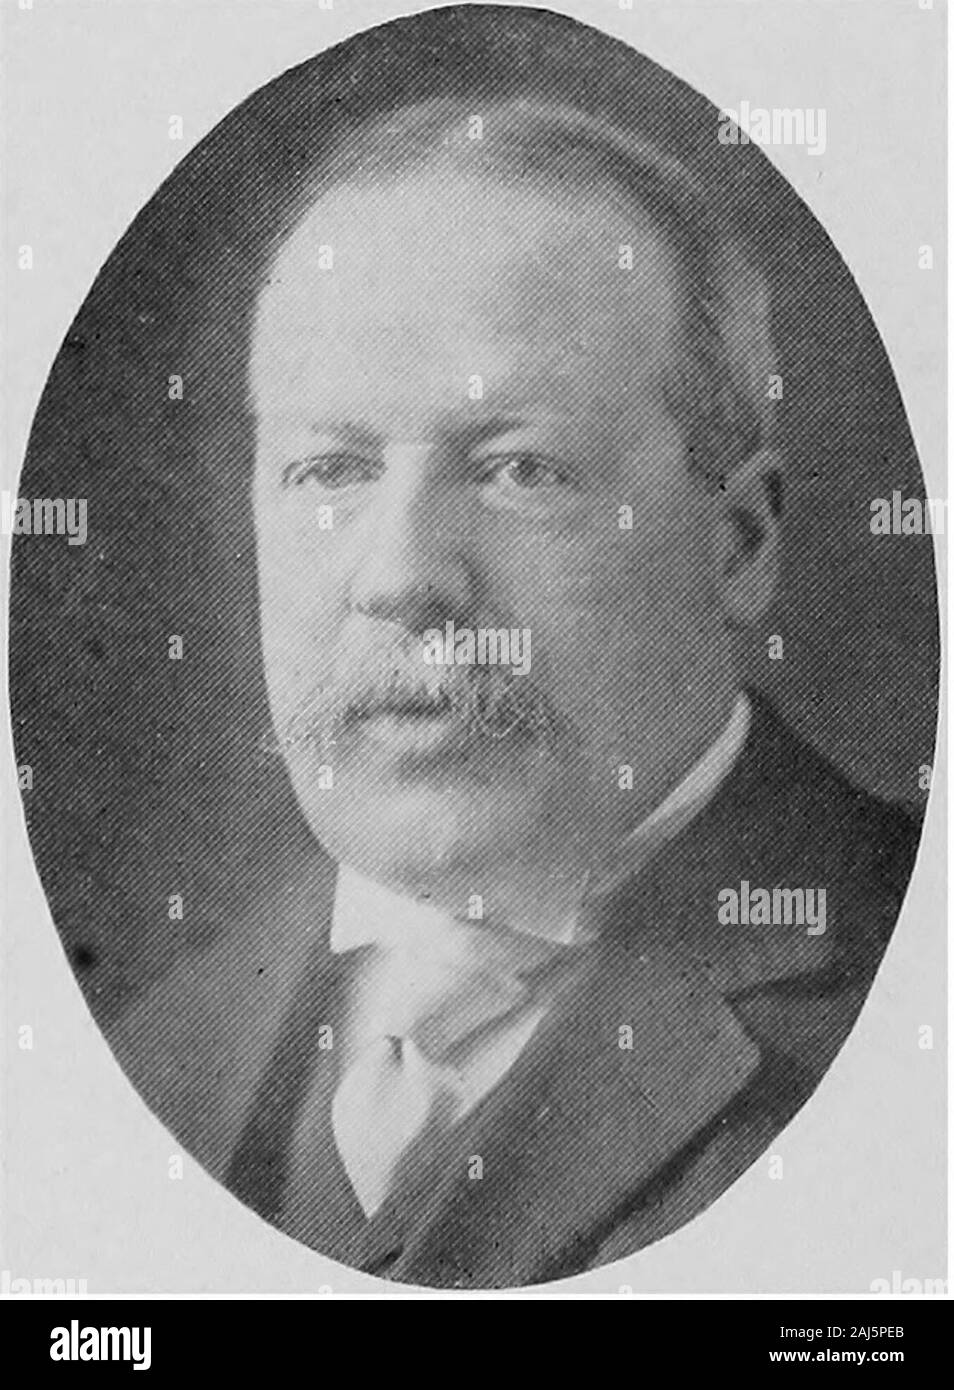 Empire state notables, 1914 . PAUL MONROE University Prof., Adjunct Prof., History of Edn 1899-1902, Since 1902 Teachers Coll., Columbia University, Lecturer in Education Yale University 1906-1907 New York City PROF. HENRY SMITH MUNROE, Ph.D., S.D. Professor of Mining, School of Mines, Columbia University New York City. Stock Photo